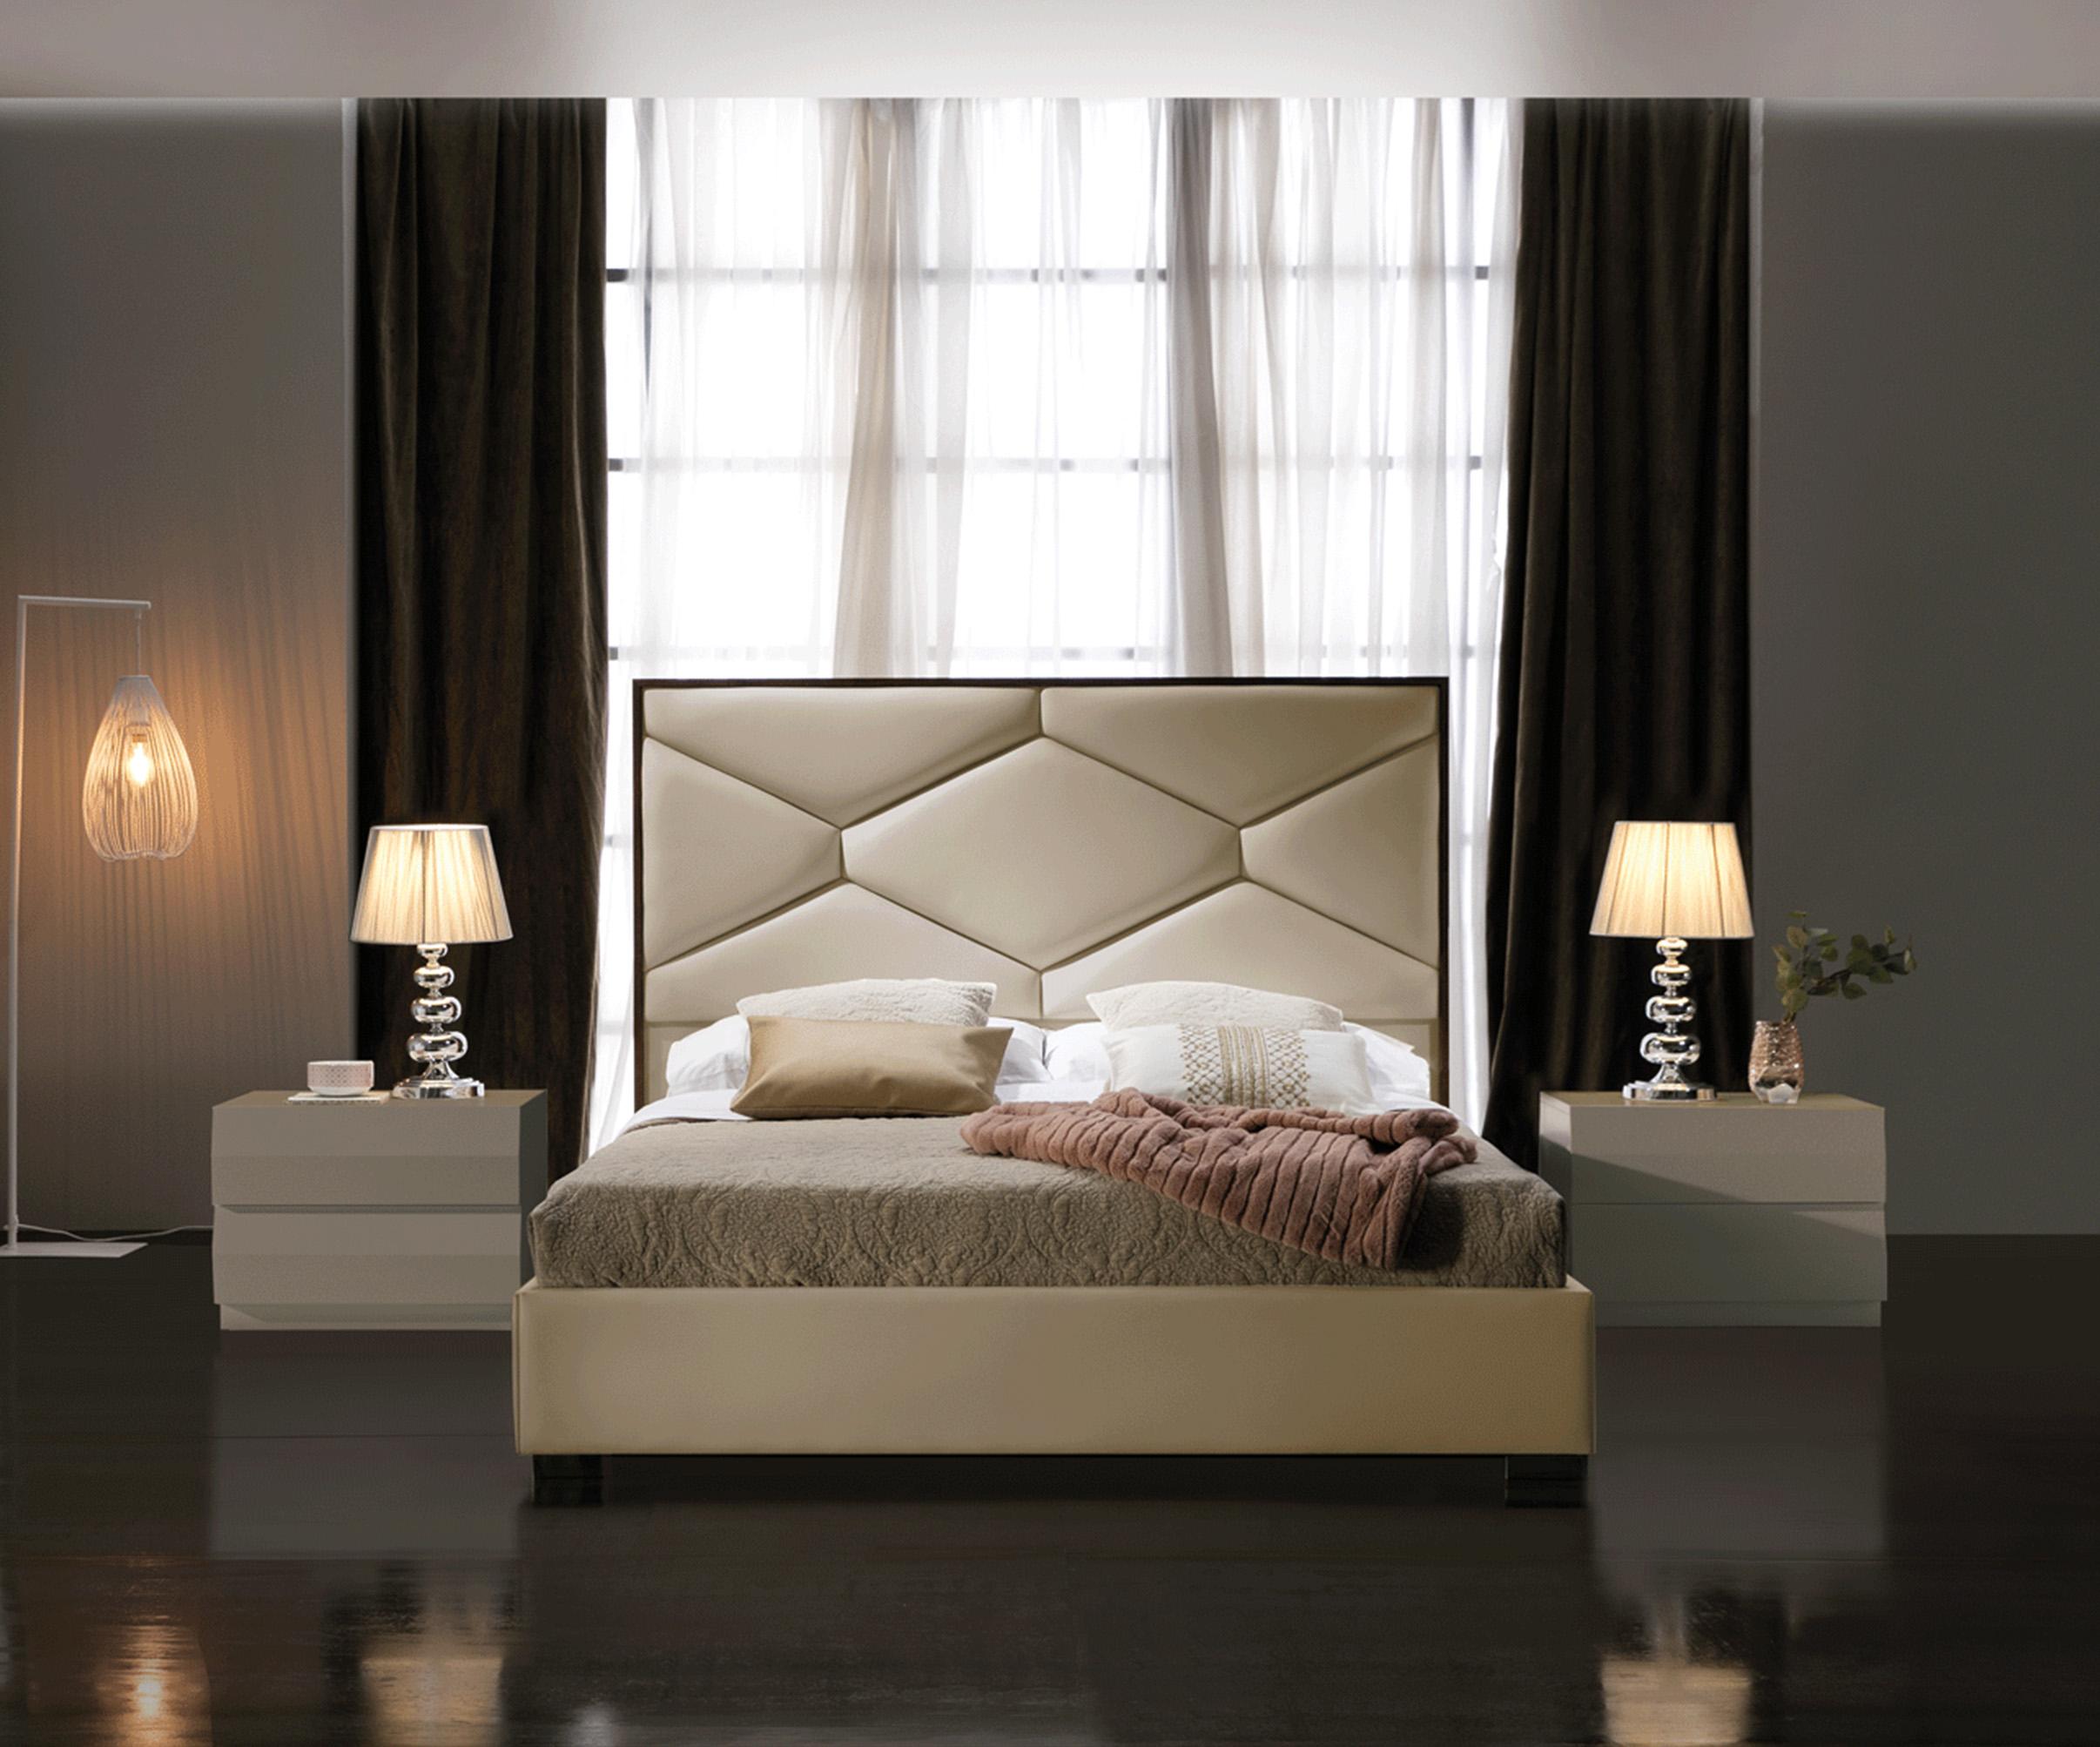 Contemporary, Modern Storage Bedroom Set MARTINABEDQS MARTINABEDQS-2N-3PC in Beige Eco-Leather